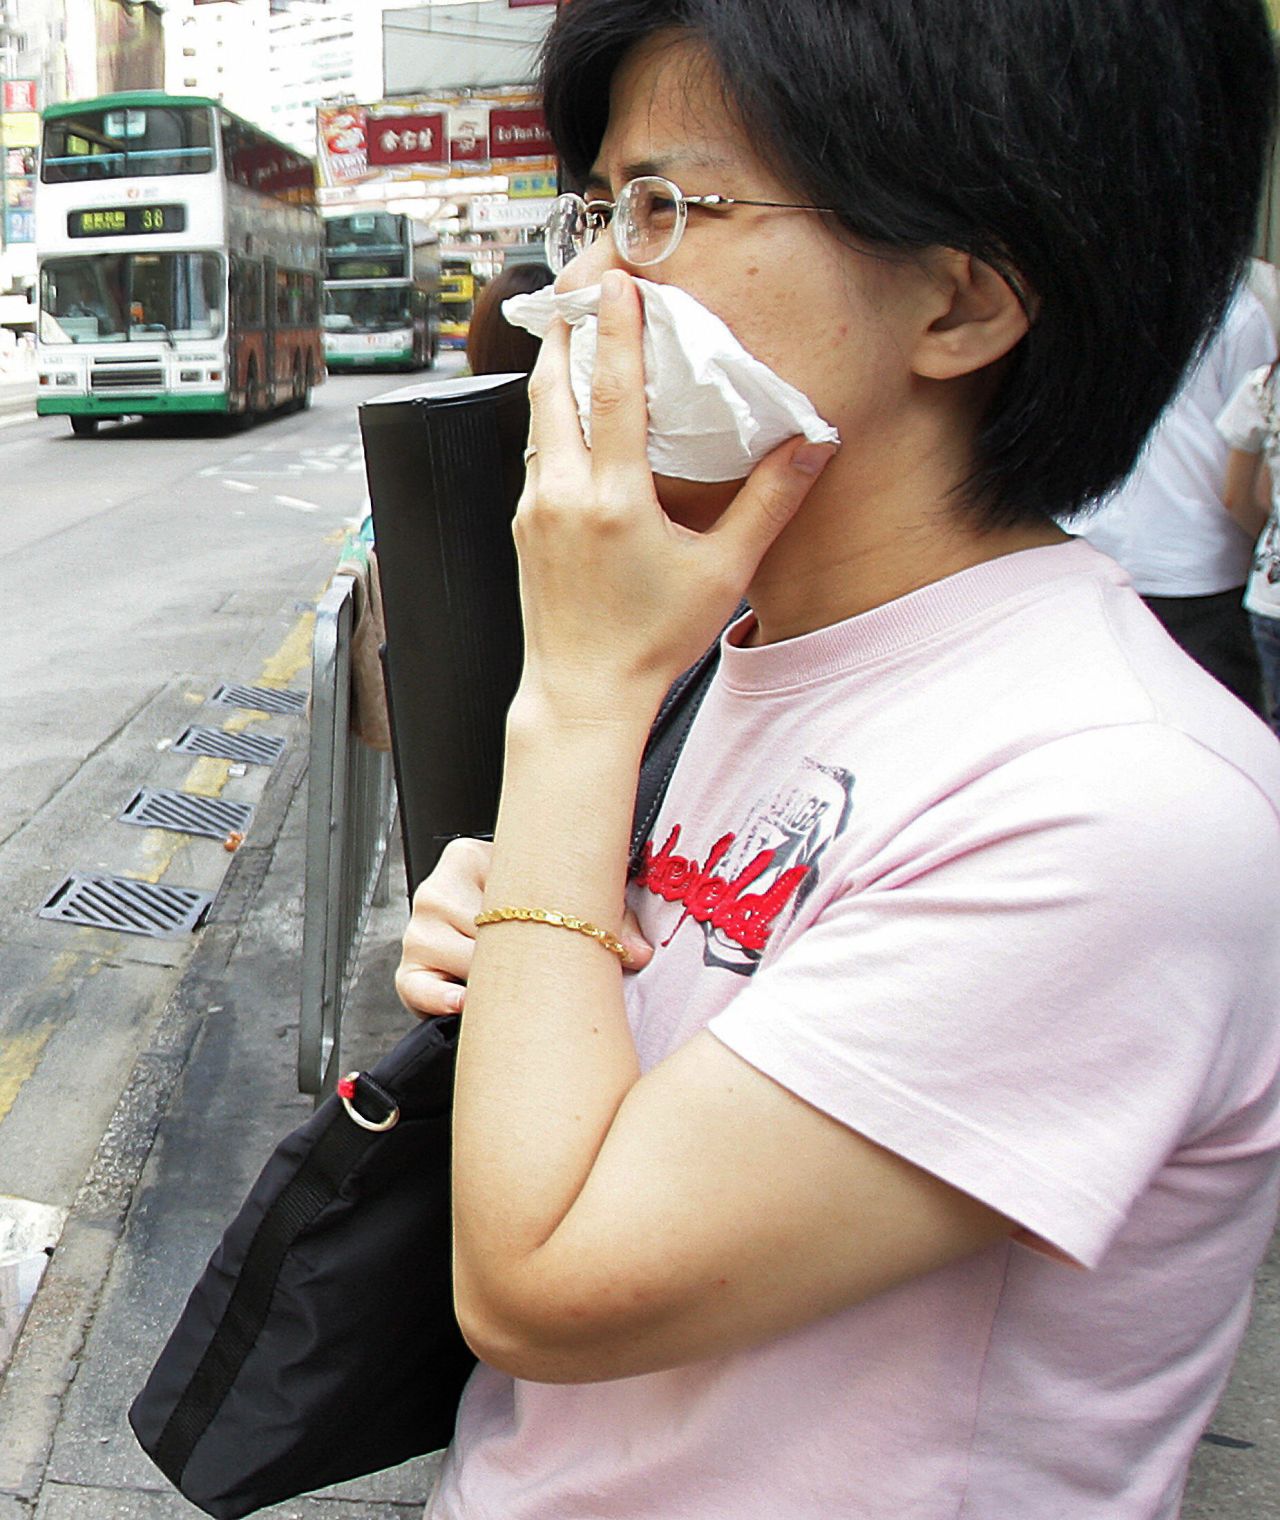 For shielding pollutants or blowing your nose, as an honorary Hong Konger, you'll always have a pack of tissues -- most likely Tempo, the dominant brand -- ready.